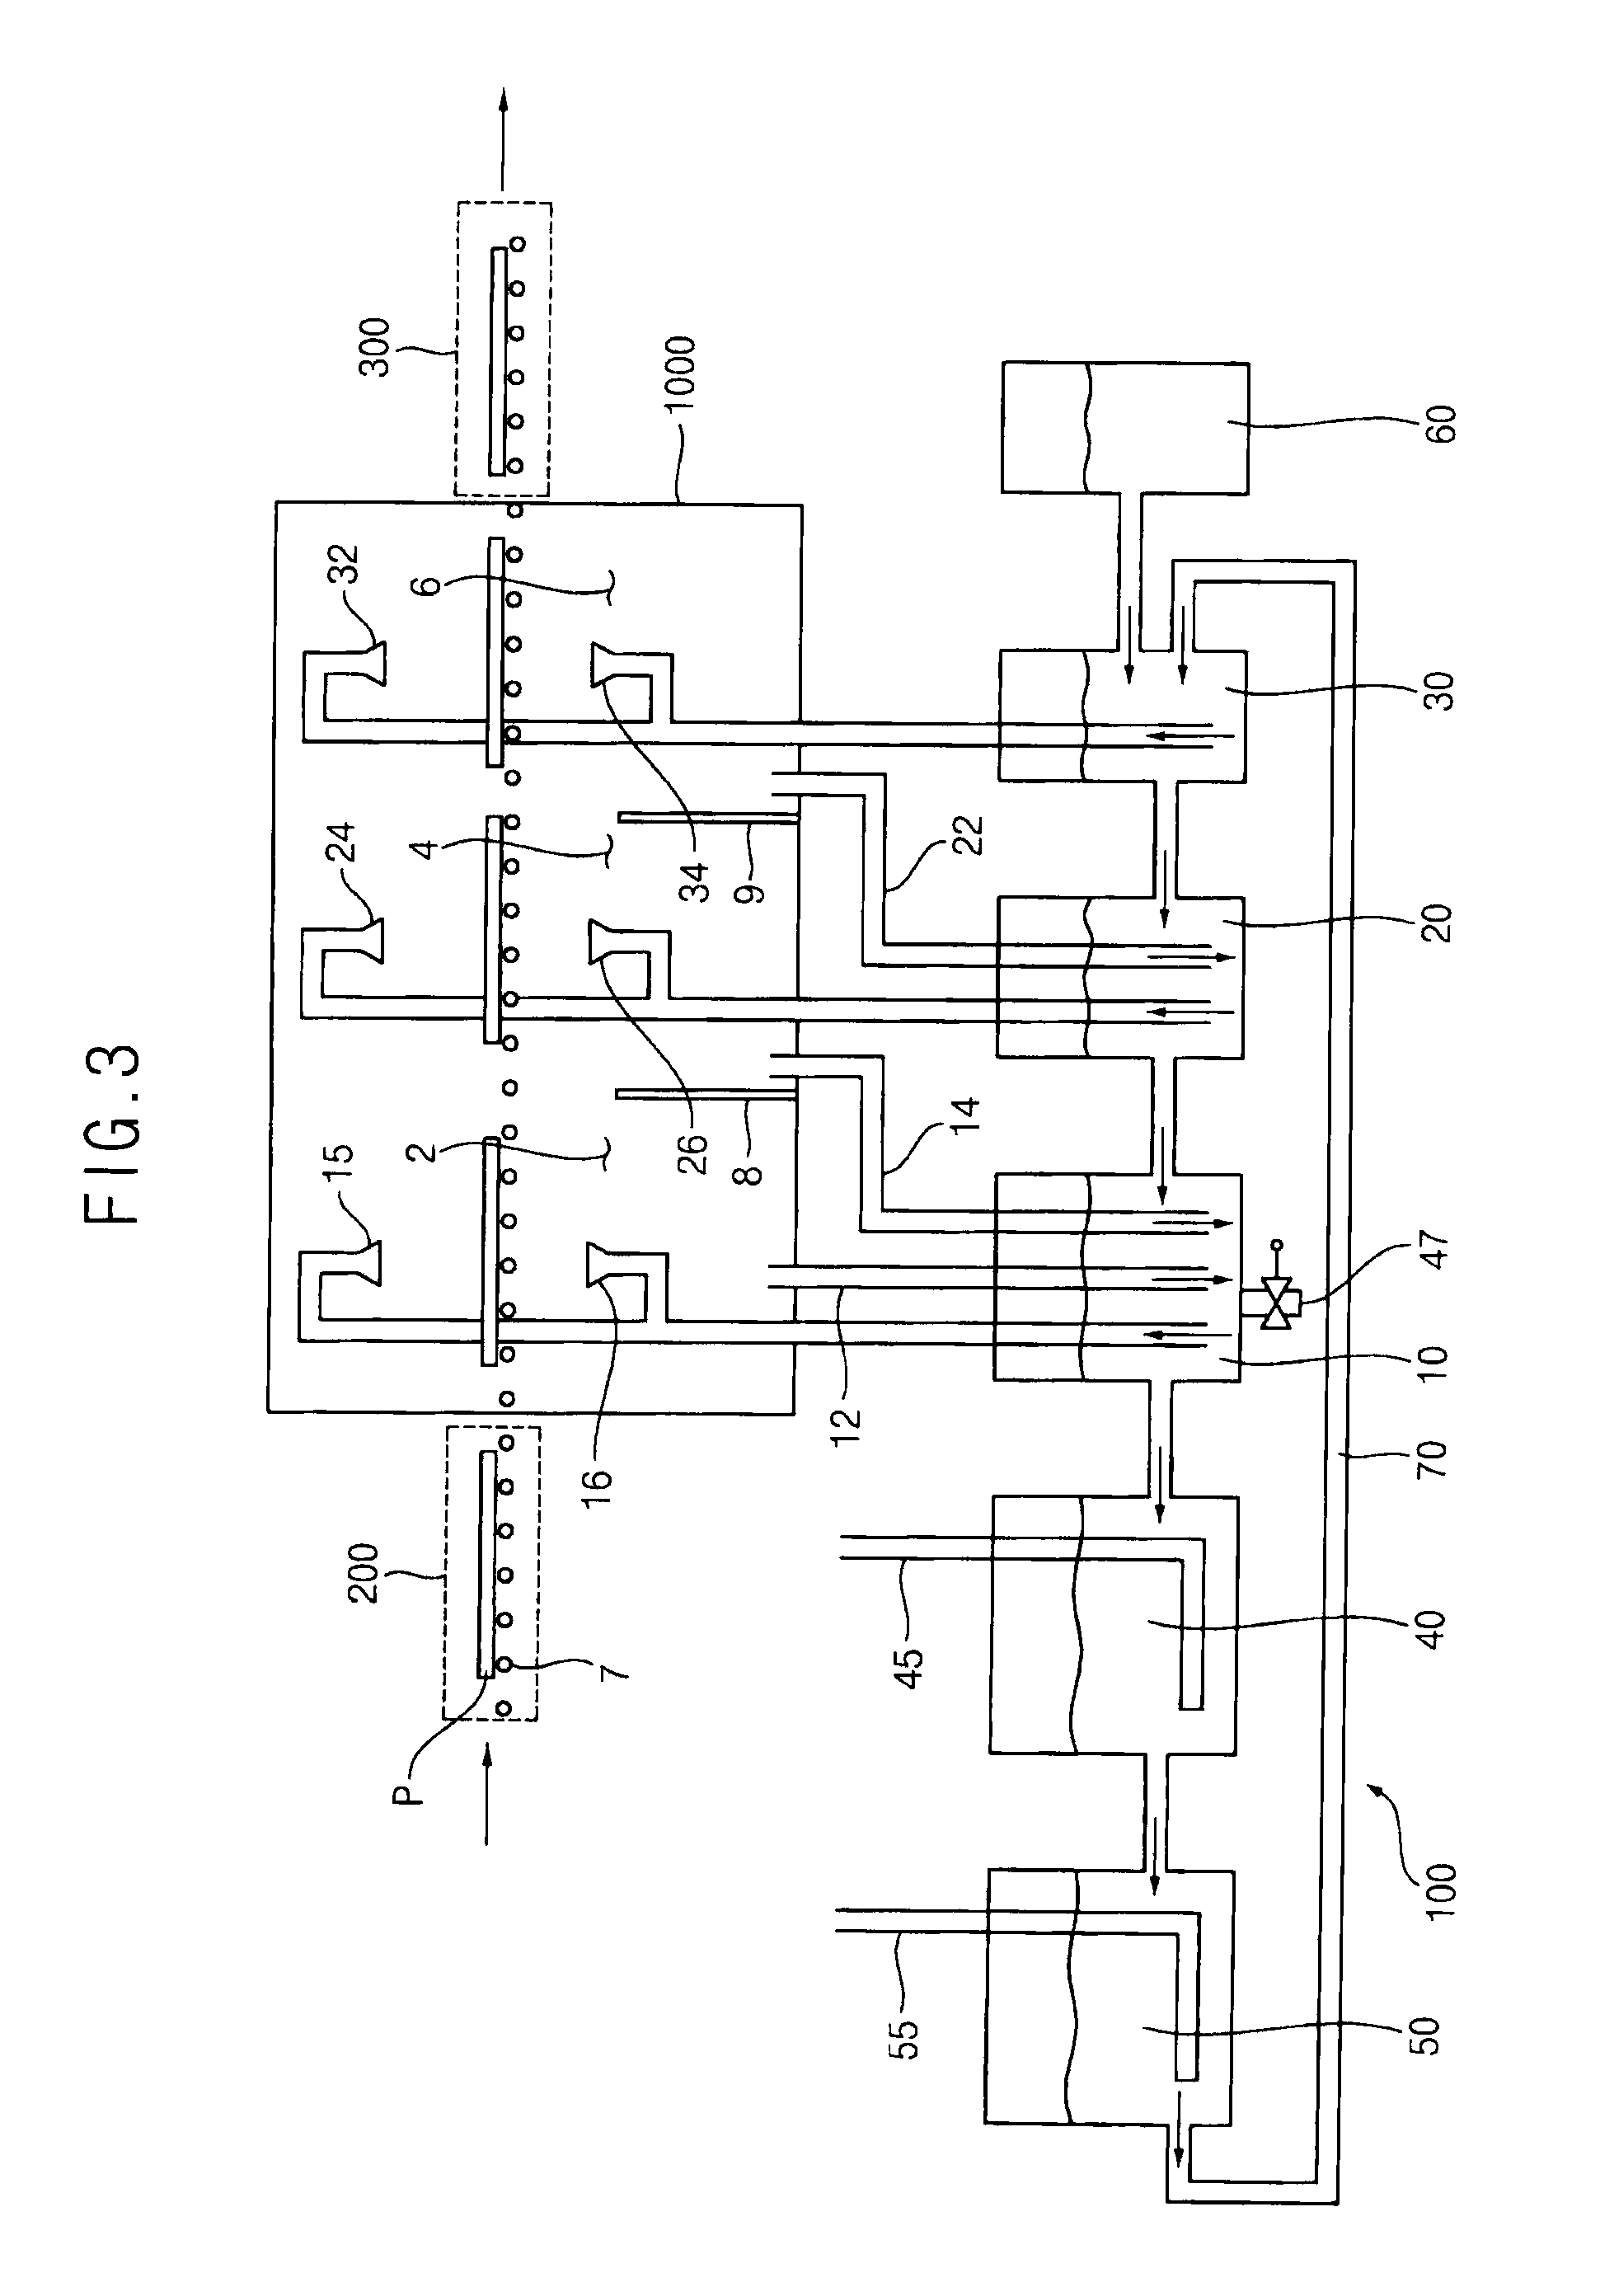 Composition for removing photoresist and method of manufacturing an array substrate using the same